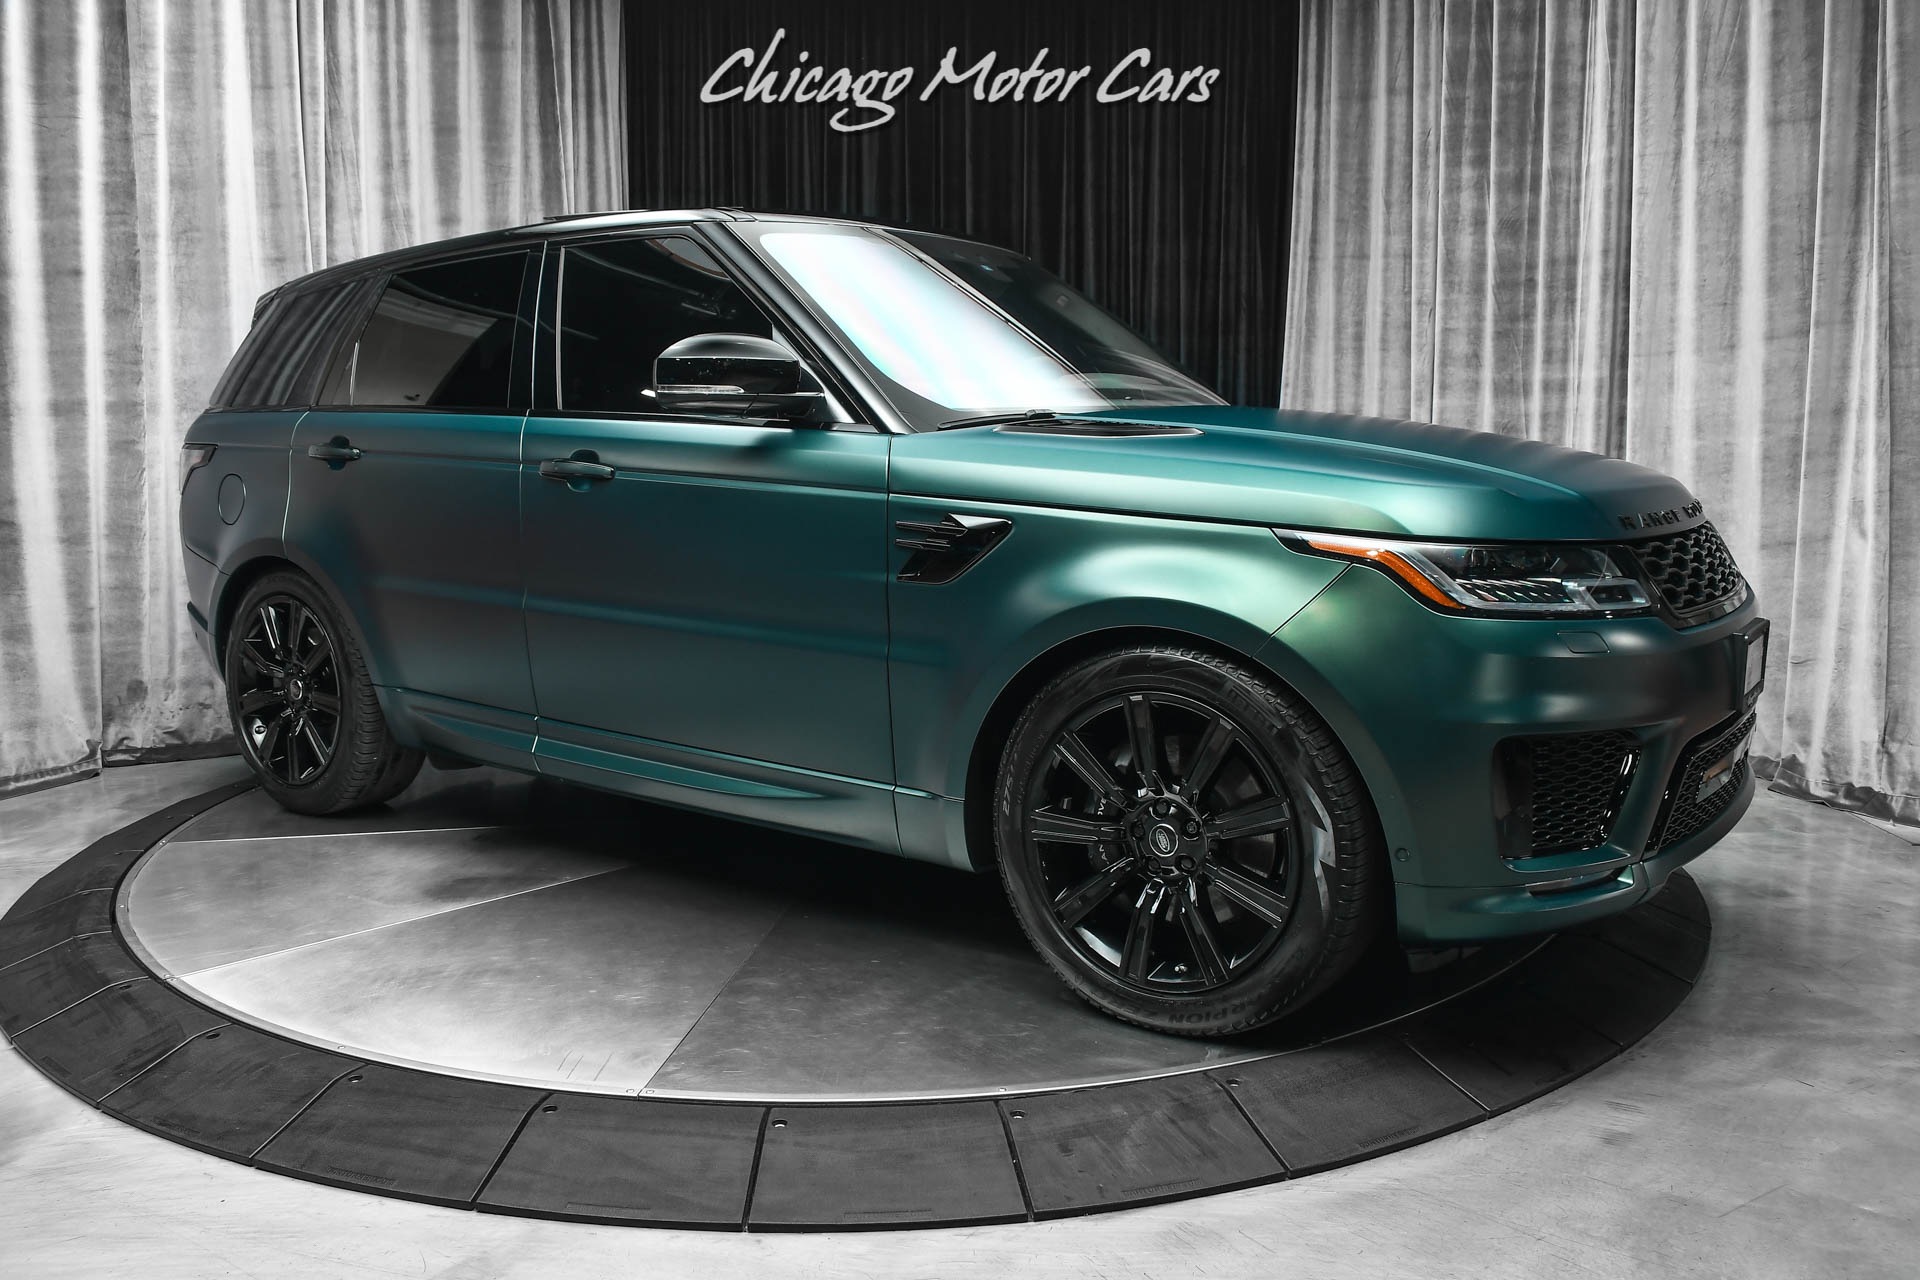 Used-2020-Land-Rover-Range-Rover-Sport-HST-Extremely-Rare-SVO-Premium-Palette-Satin-Green-Meridian-Signature-Sound